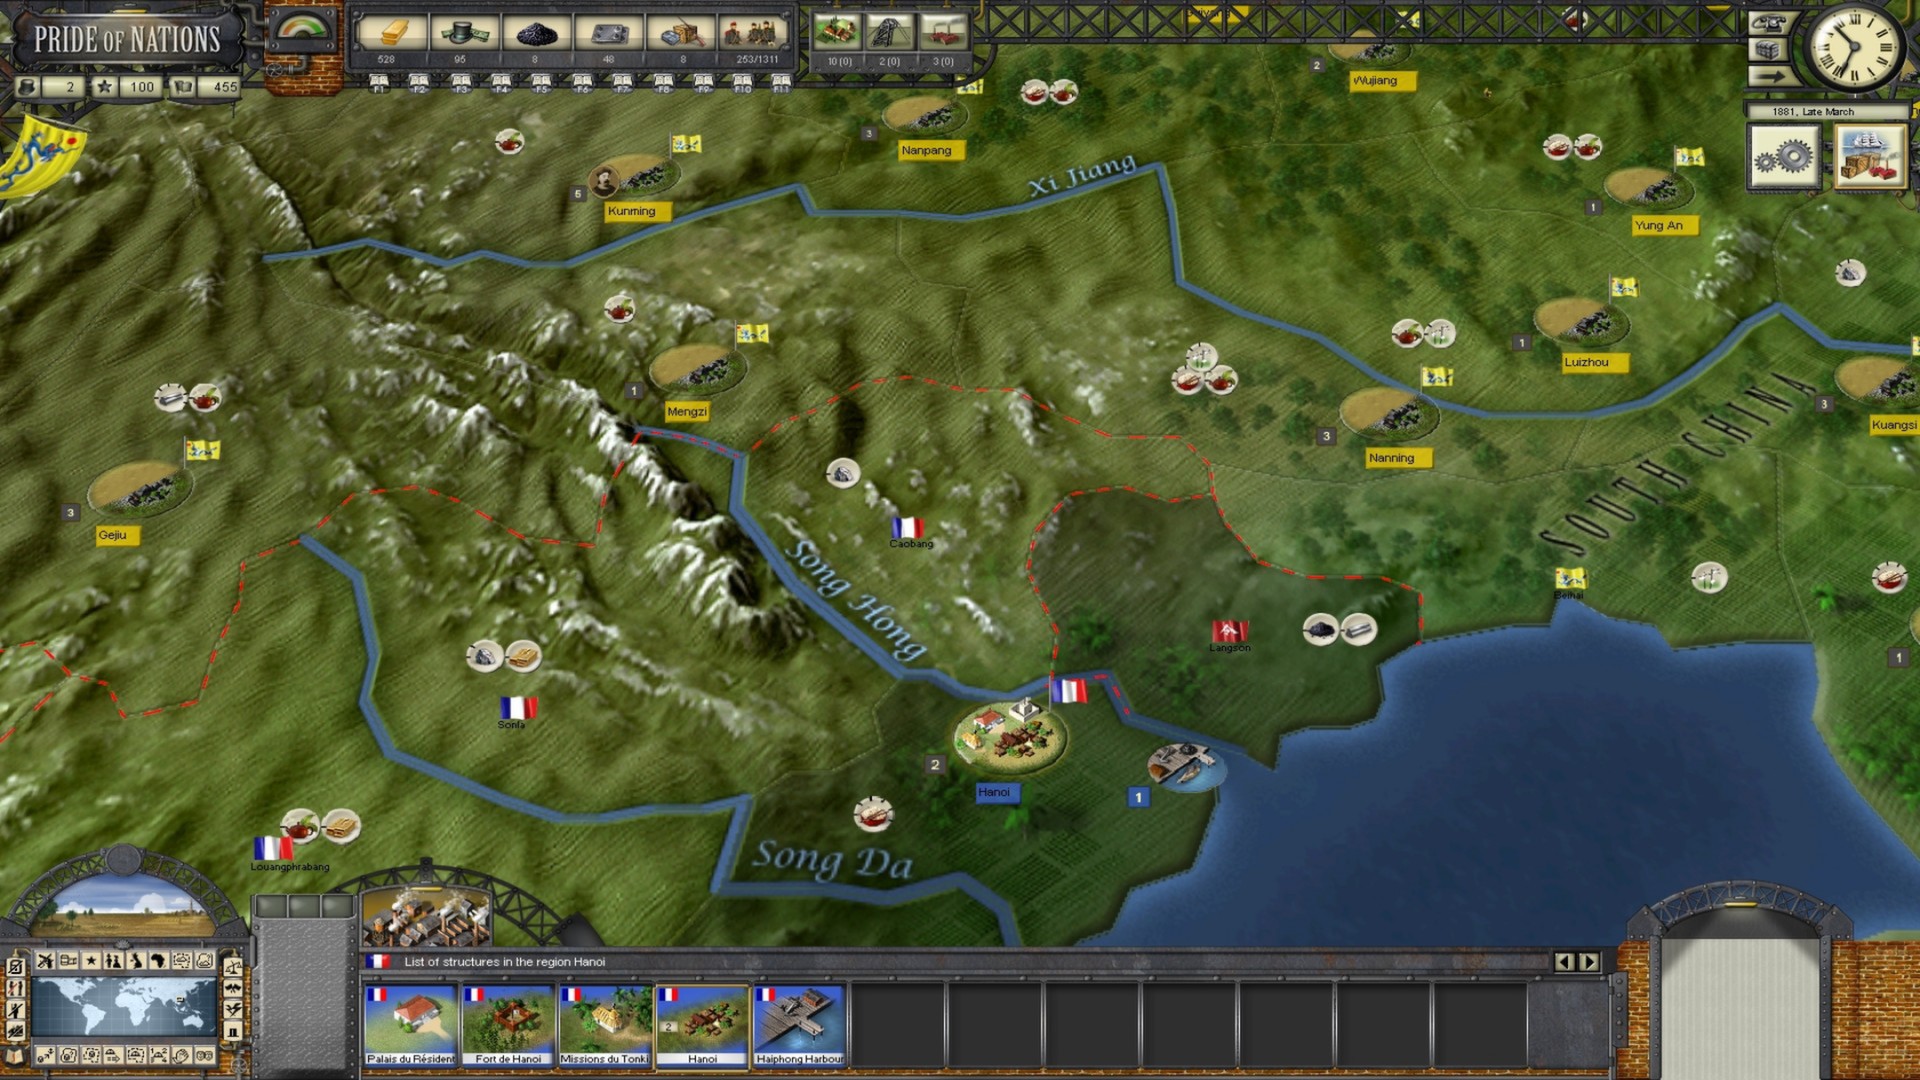 Pride of Nations - The Scramble for Africa DLC Steam CD Key, $4.38